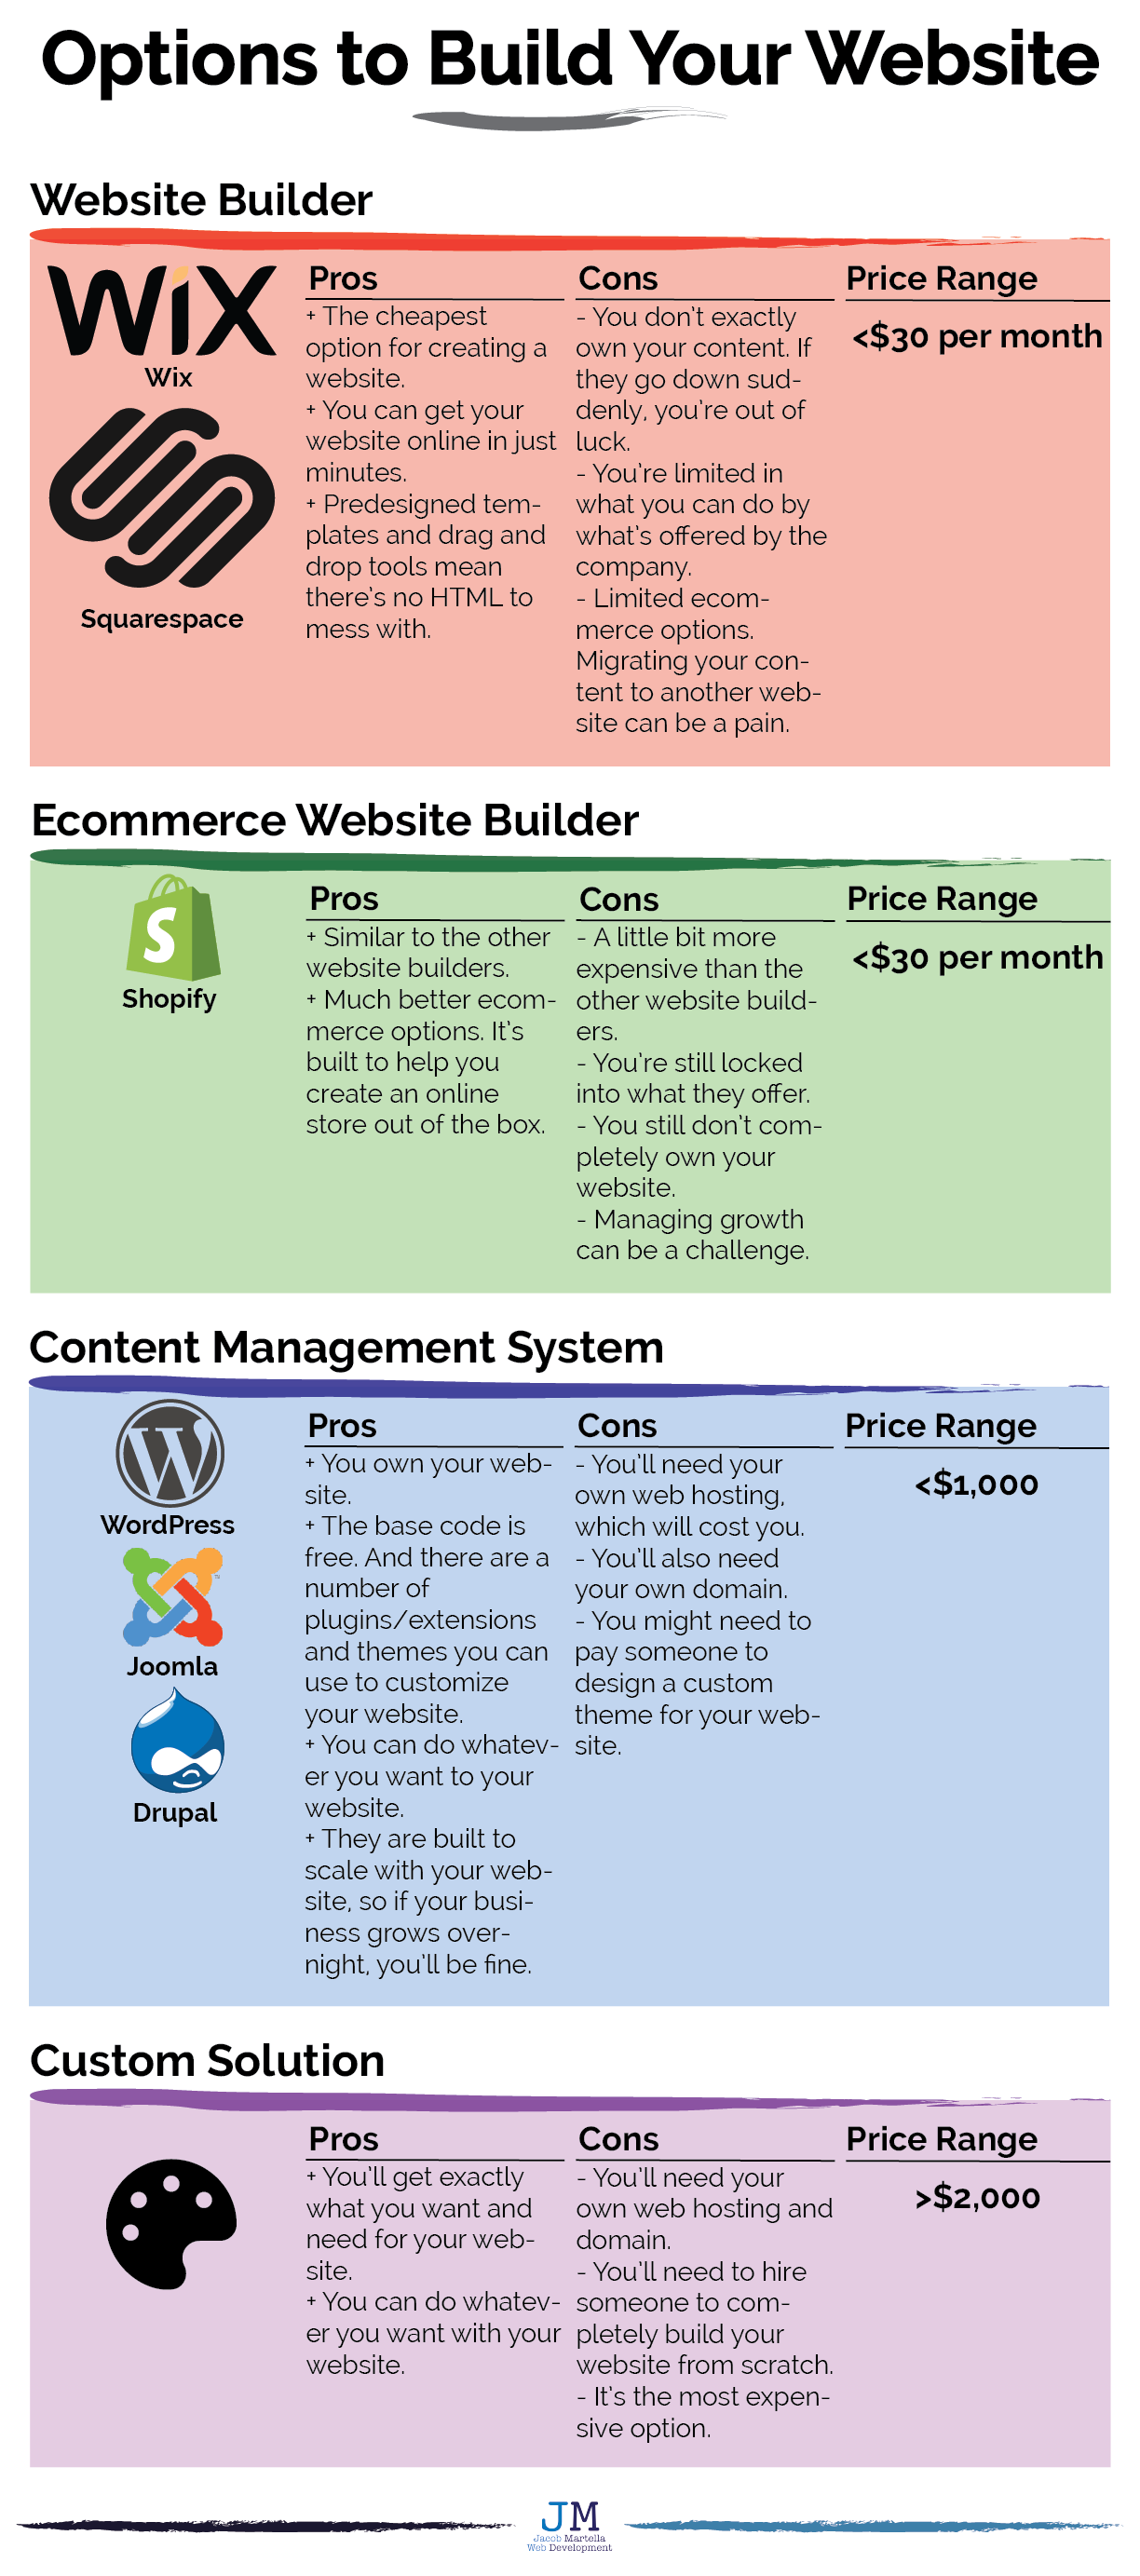 Options to Build Your Website